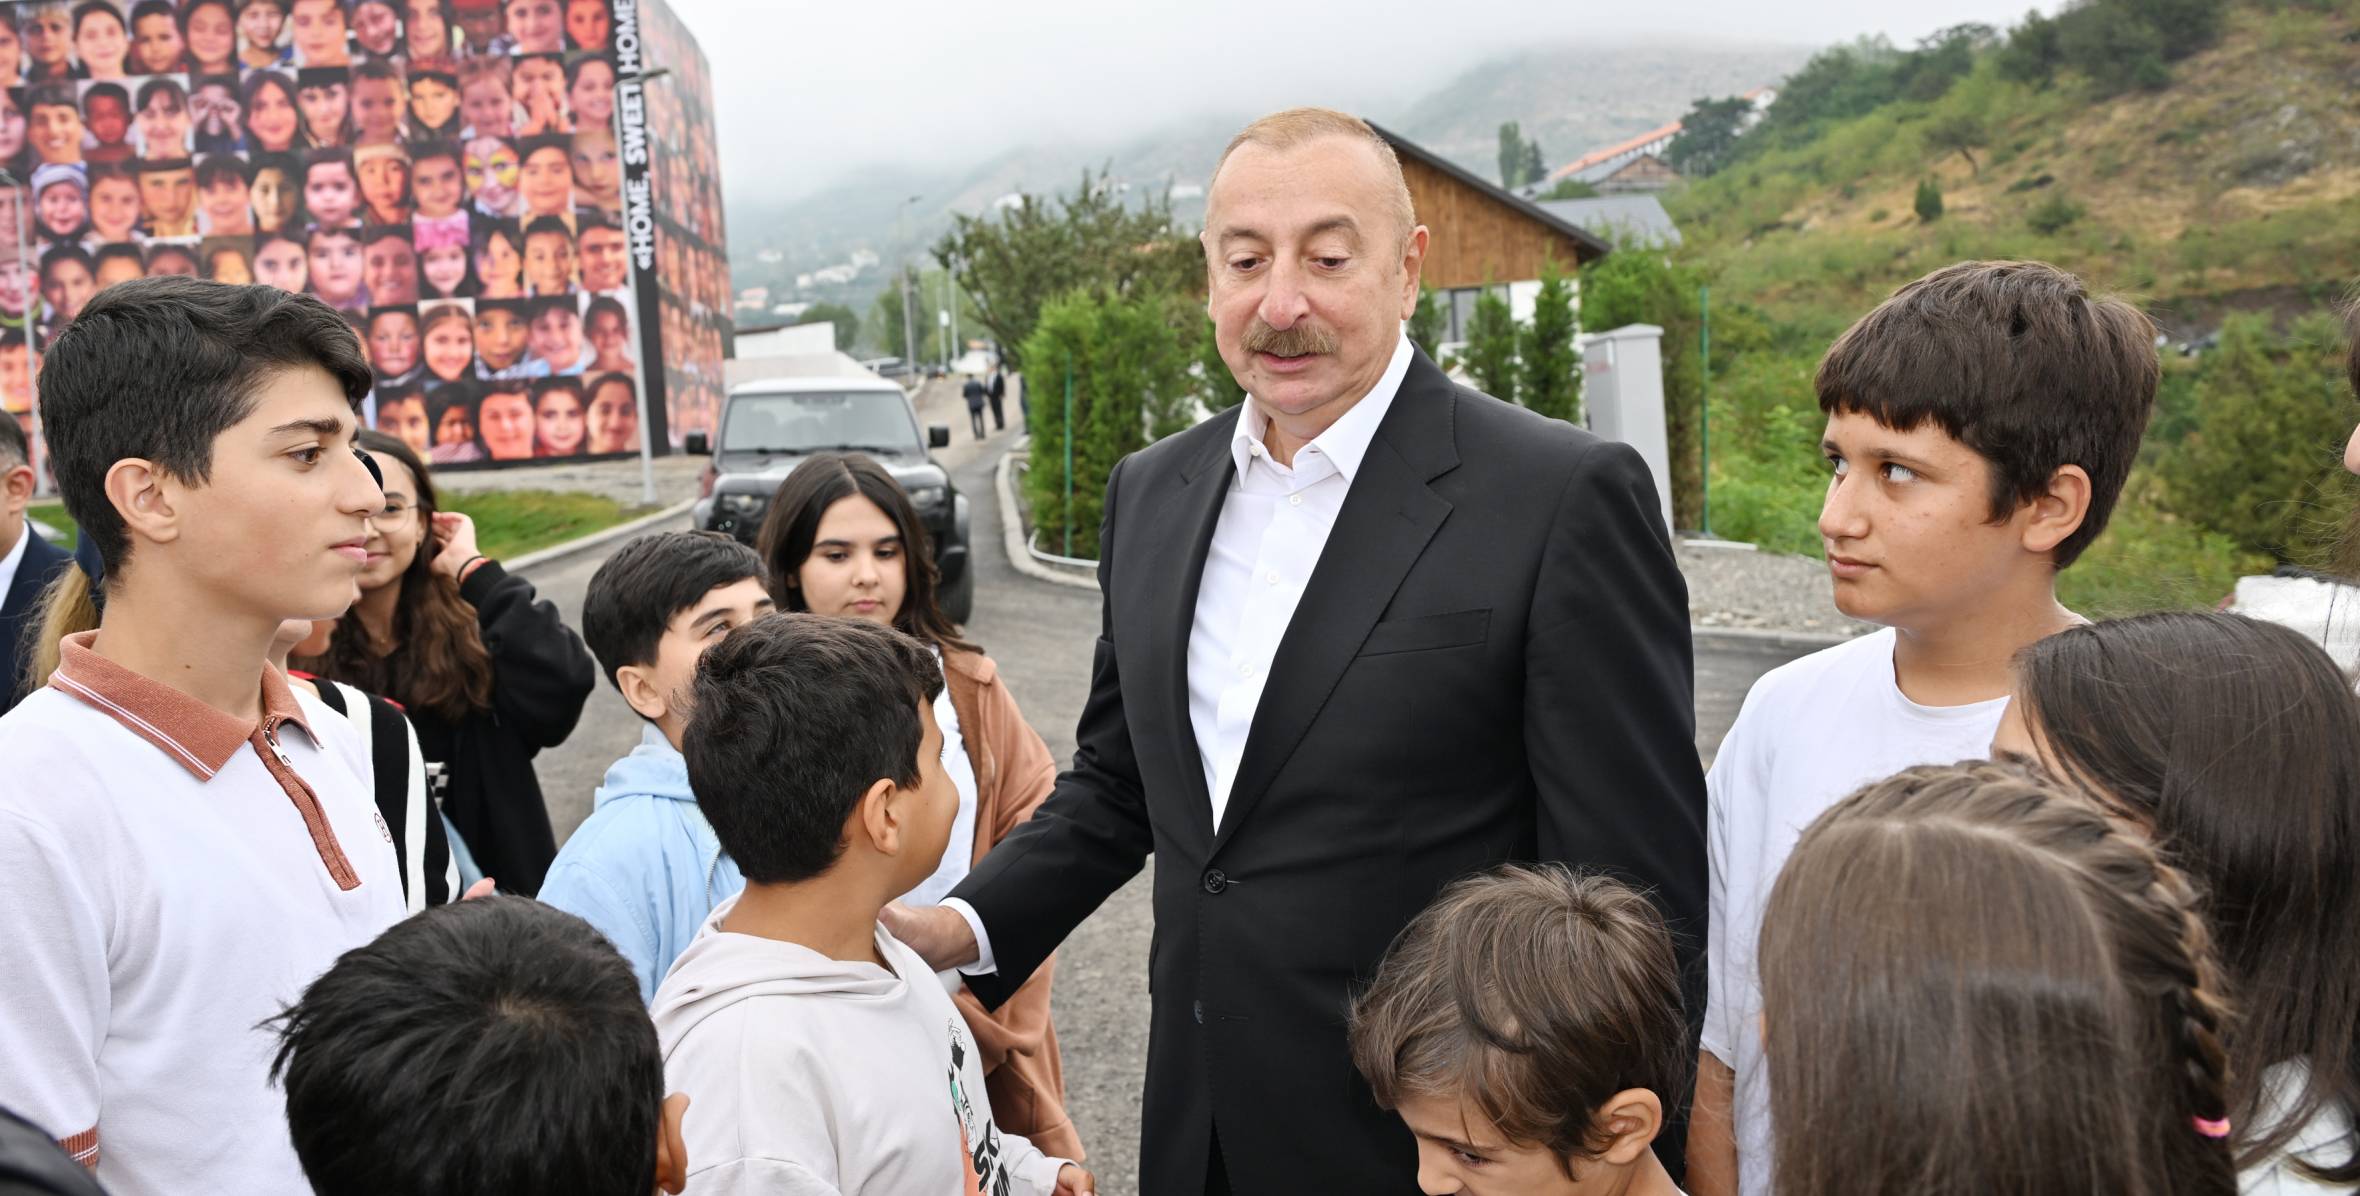 Ilham Aliyev and First Lady Mehriban Aliyeva participated in “Lachin City Day” festivities